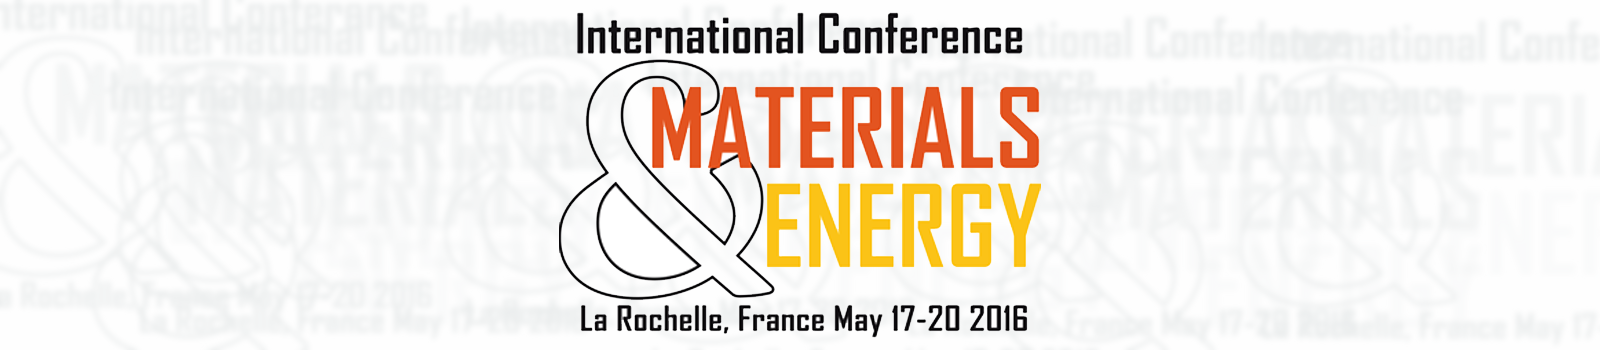 International Conference On Materials and Energy 2016